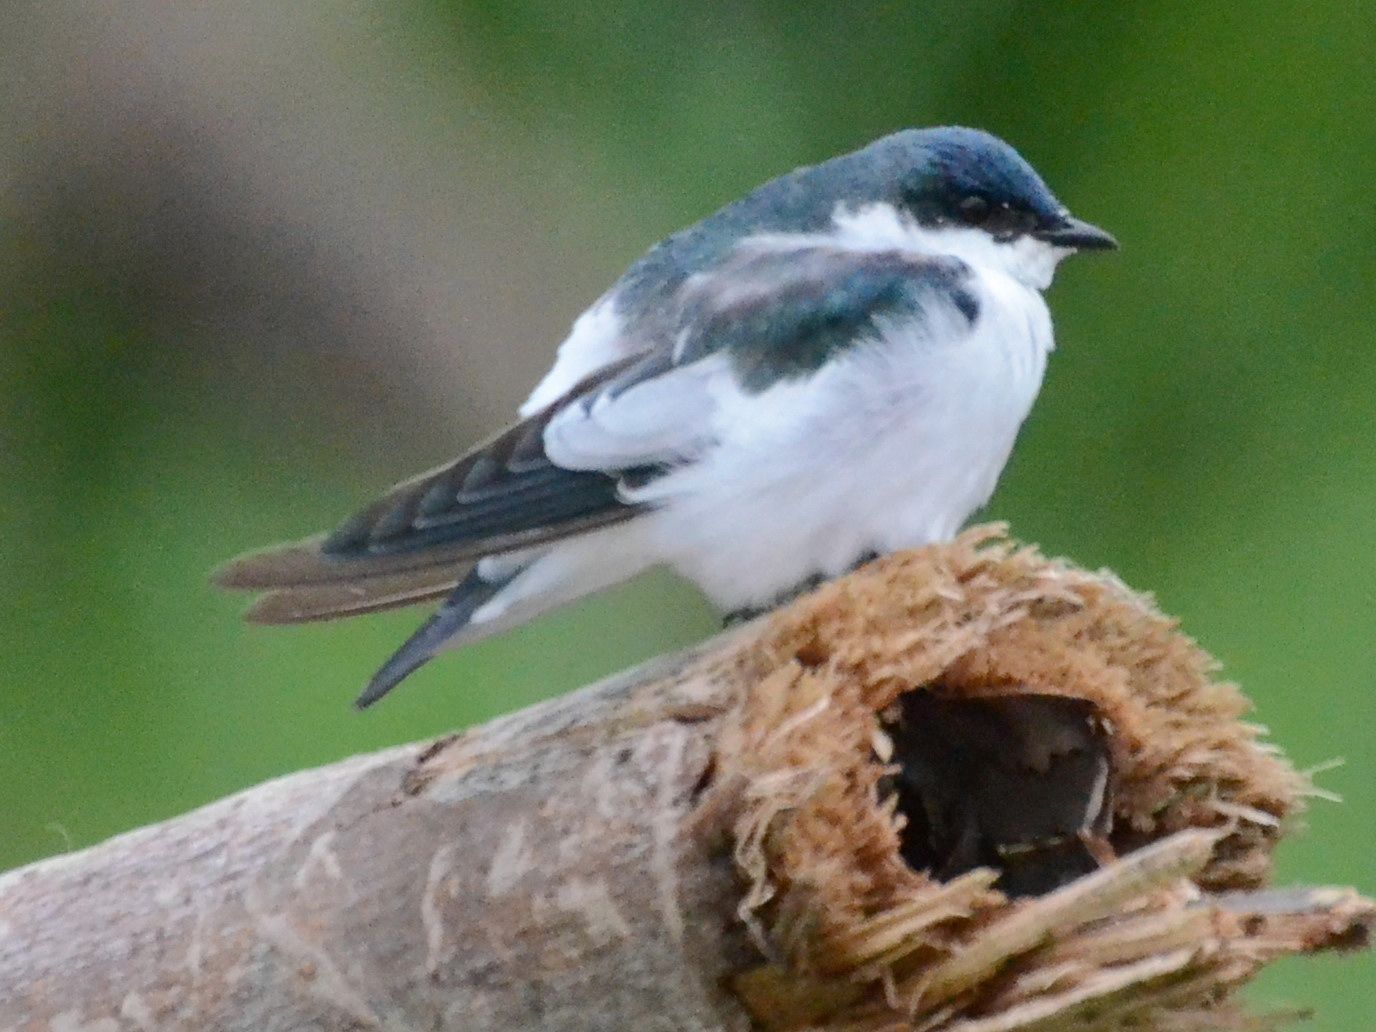 Click picture to see more White-winged Swallows.